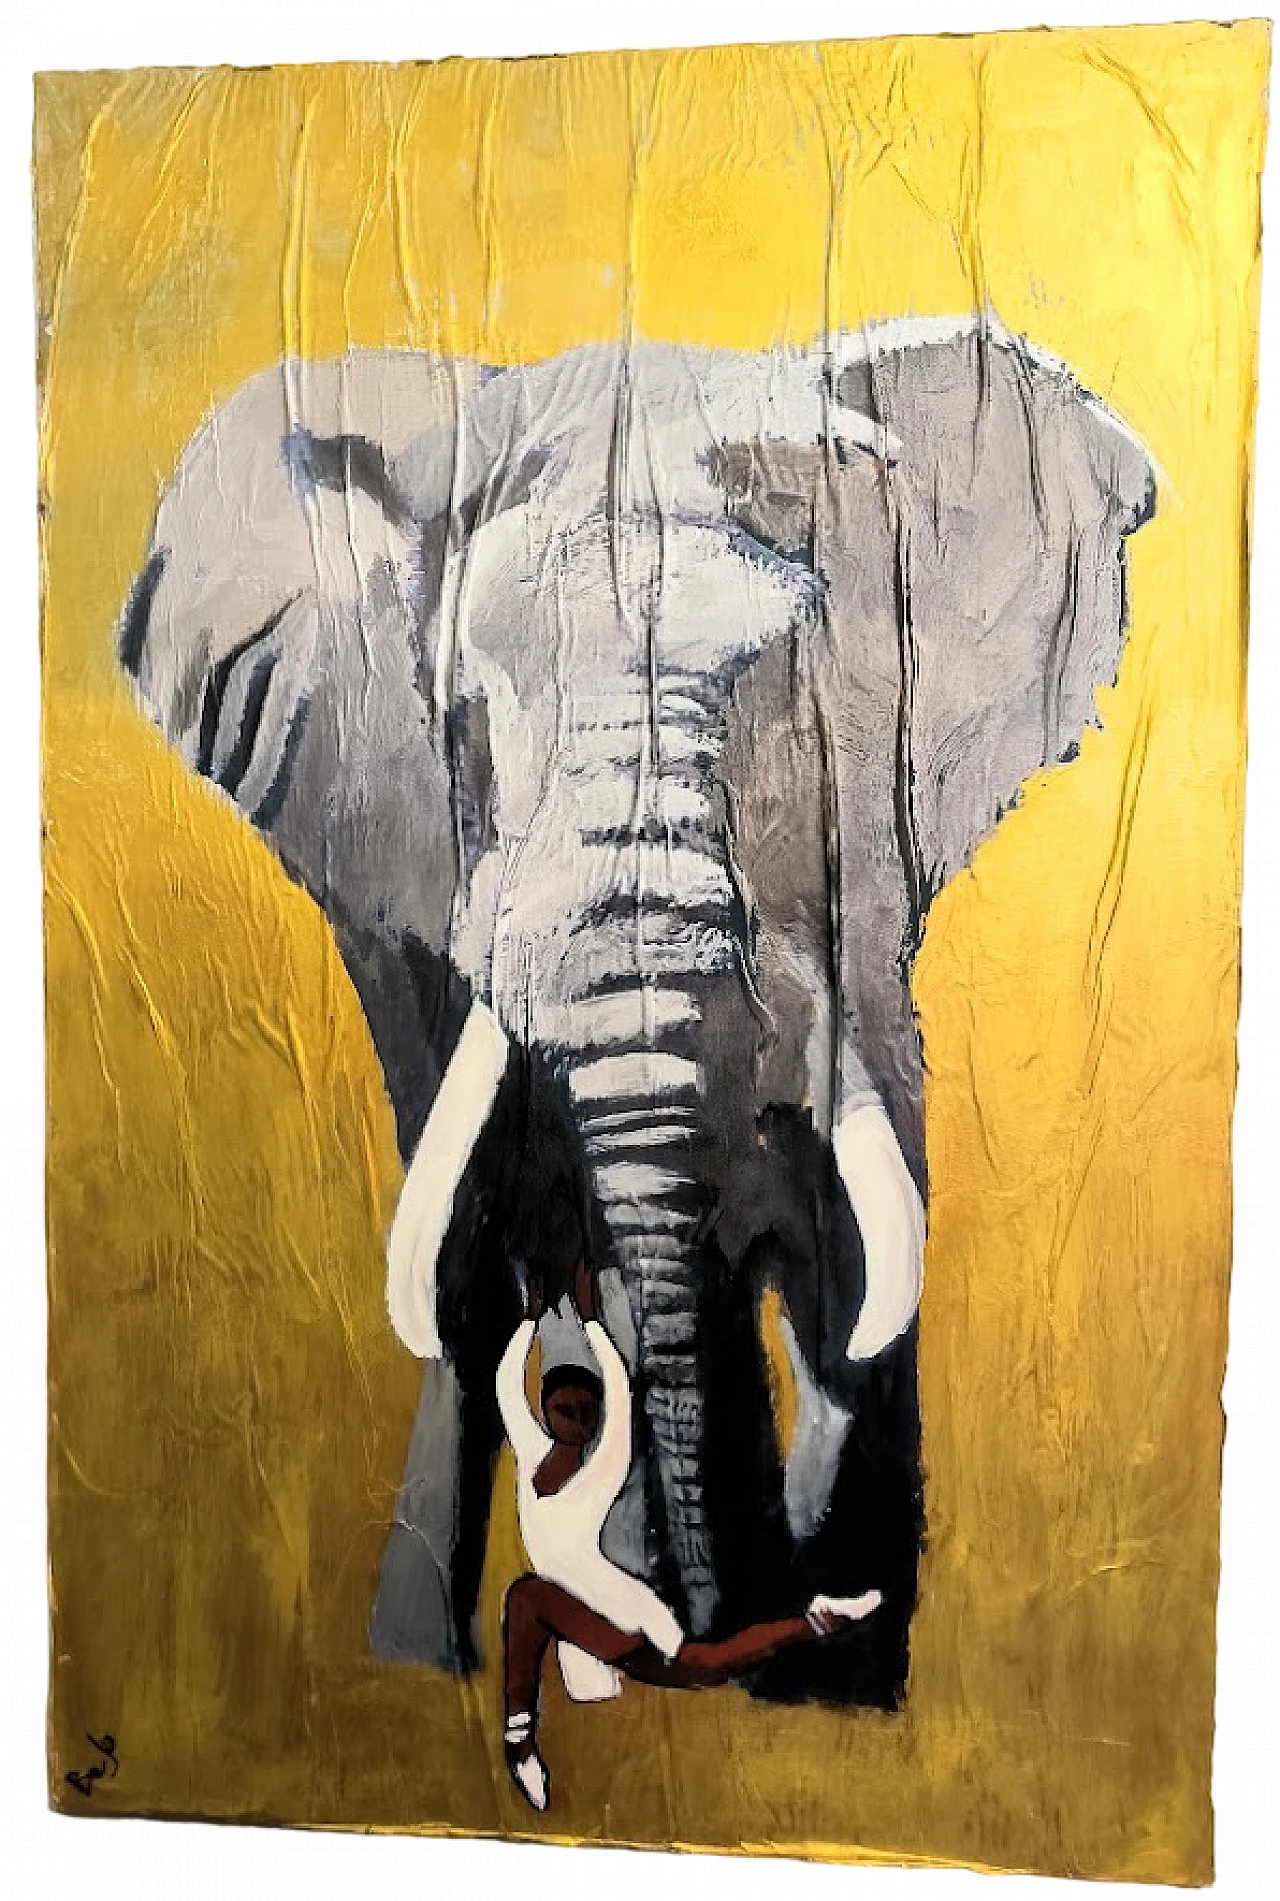 Bajo, Elephant and dancer, acrylic painting on canvas and paper, 2000 5